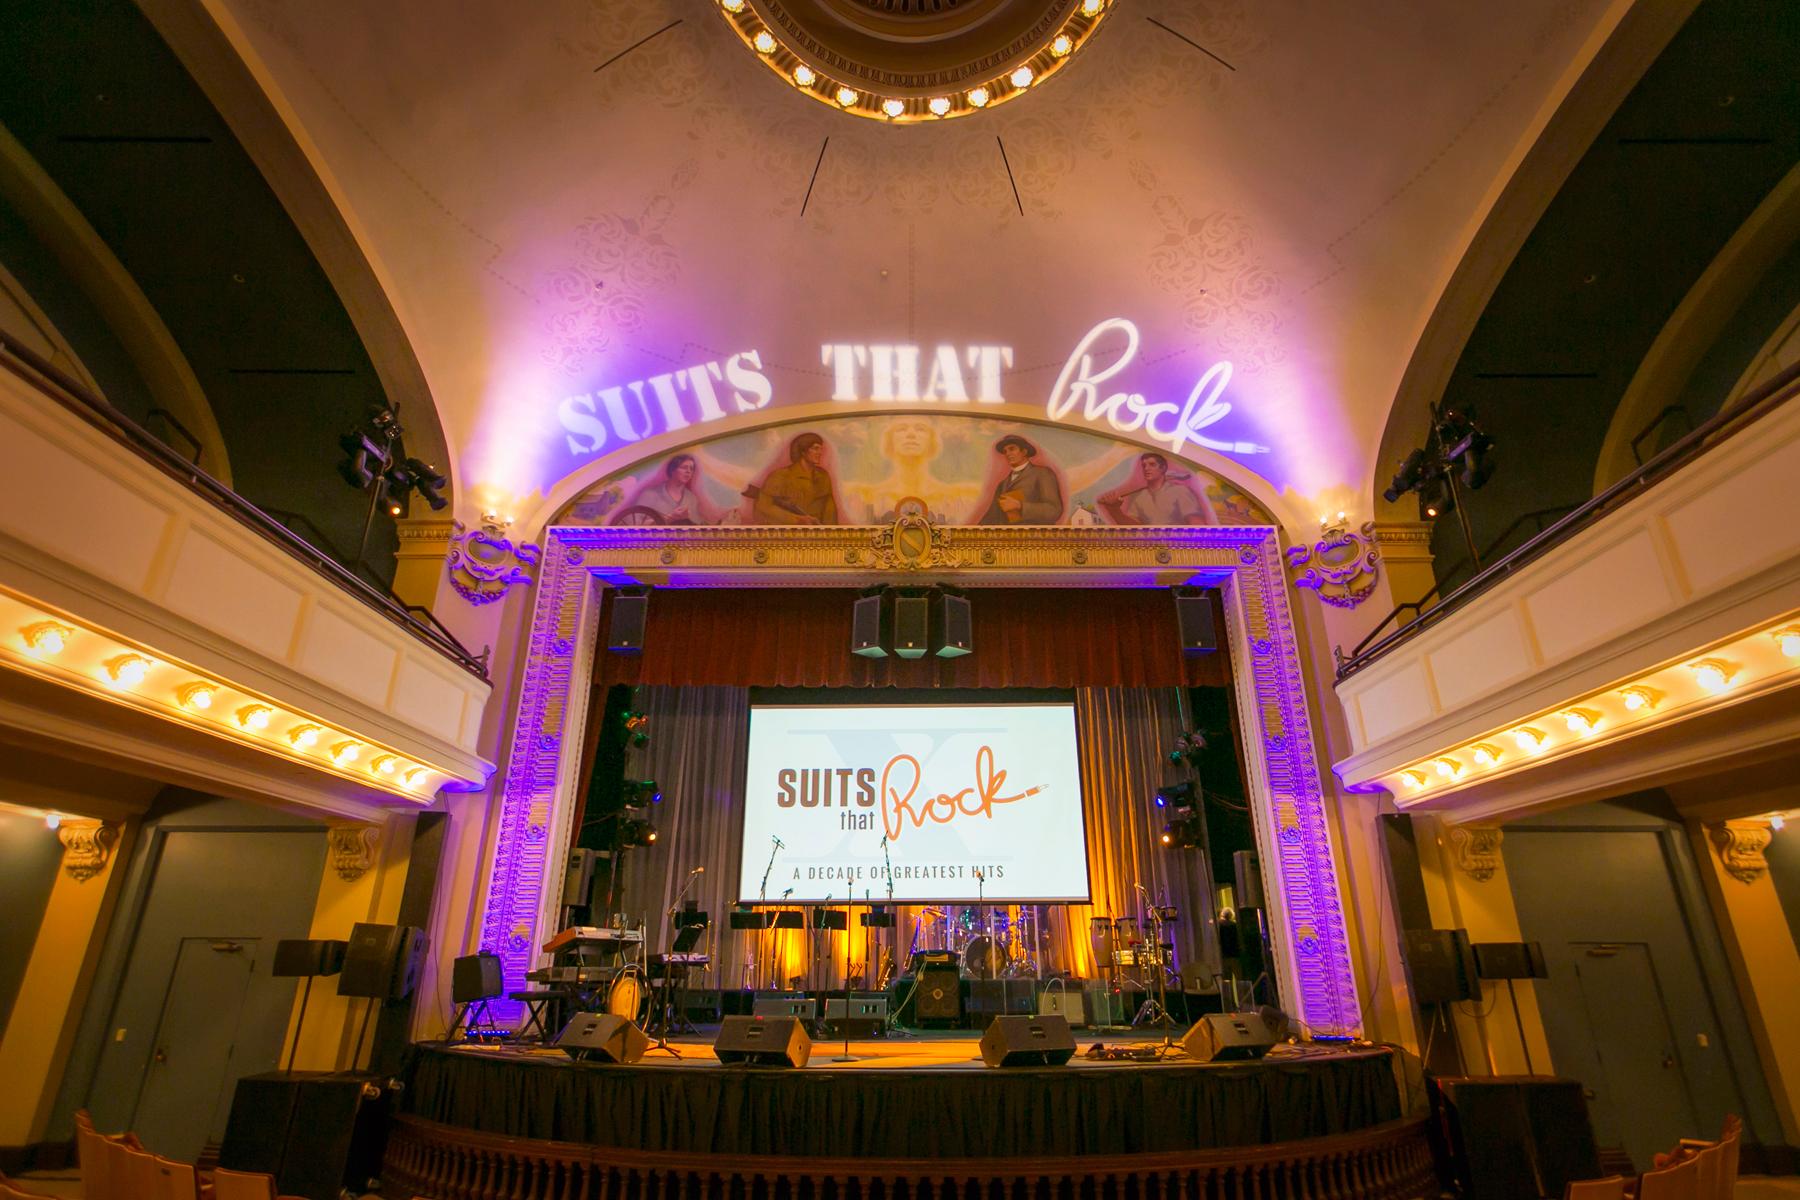 Photos From Last Night's "Suits That Rock" Rock Concert At The Carnegie